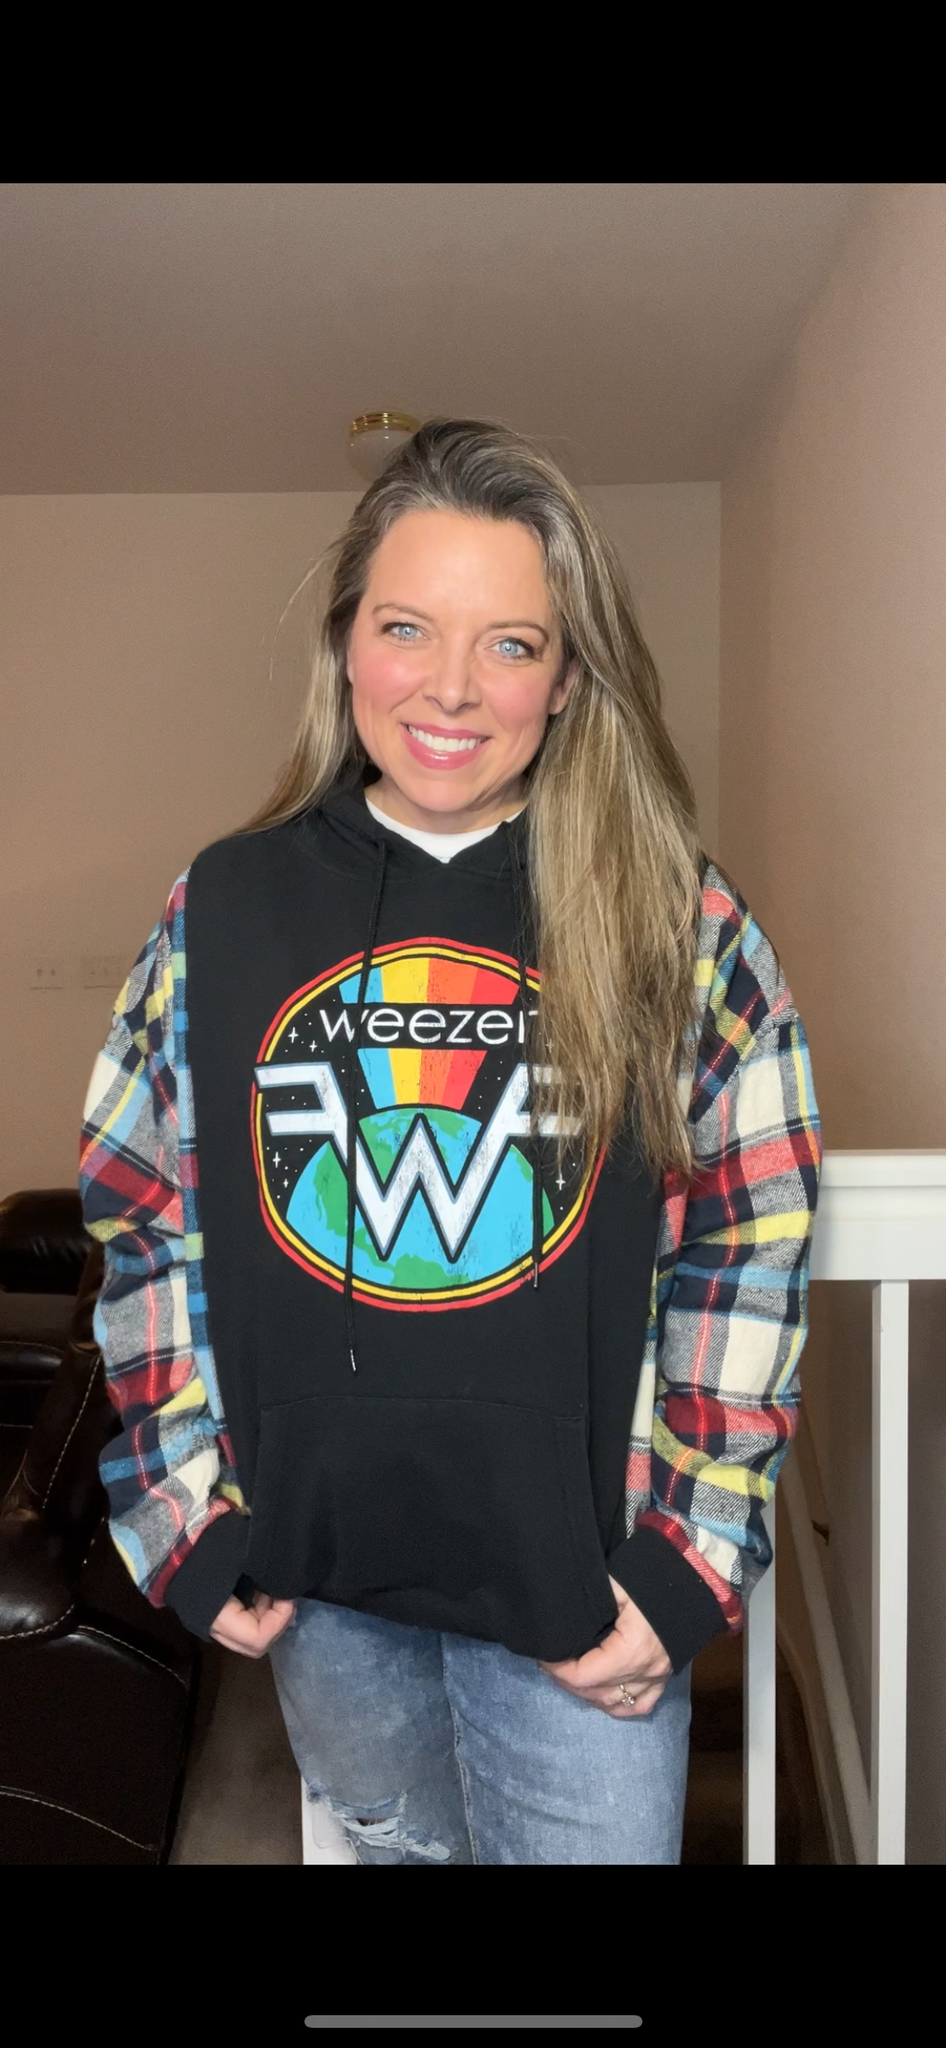 Weezer - women’s large – midweight sweatshirt with flannel sleeves ￼